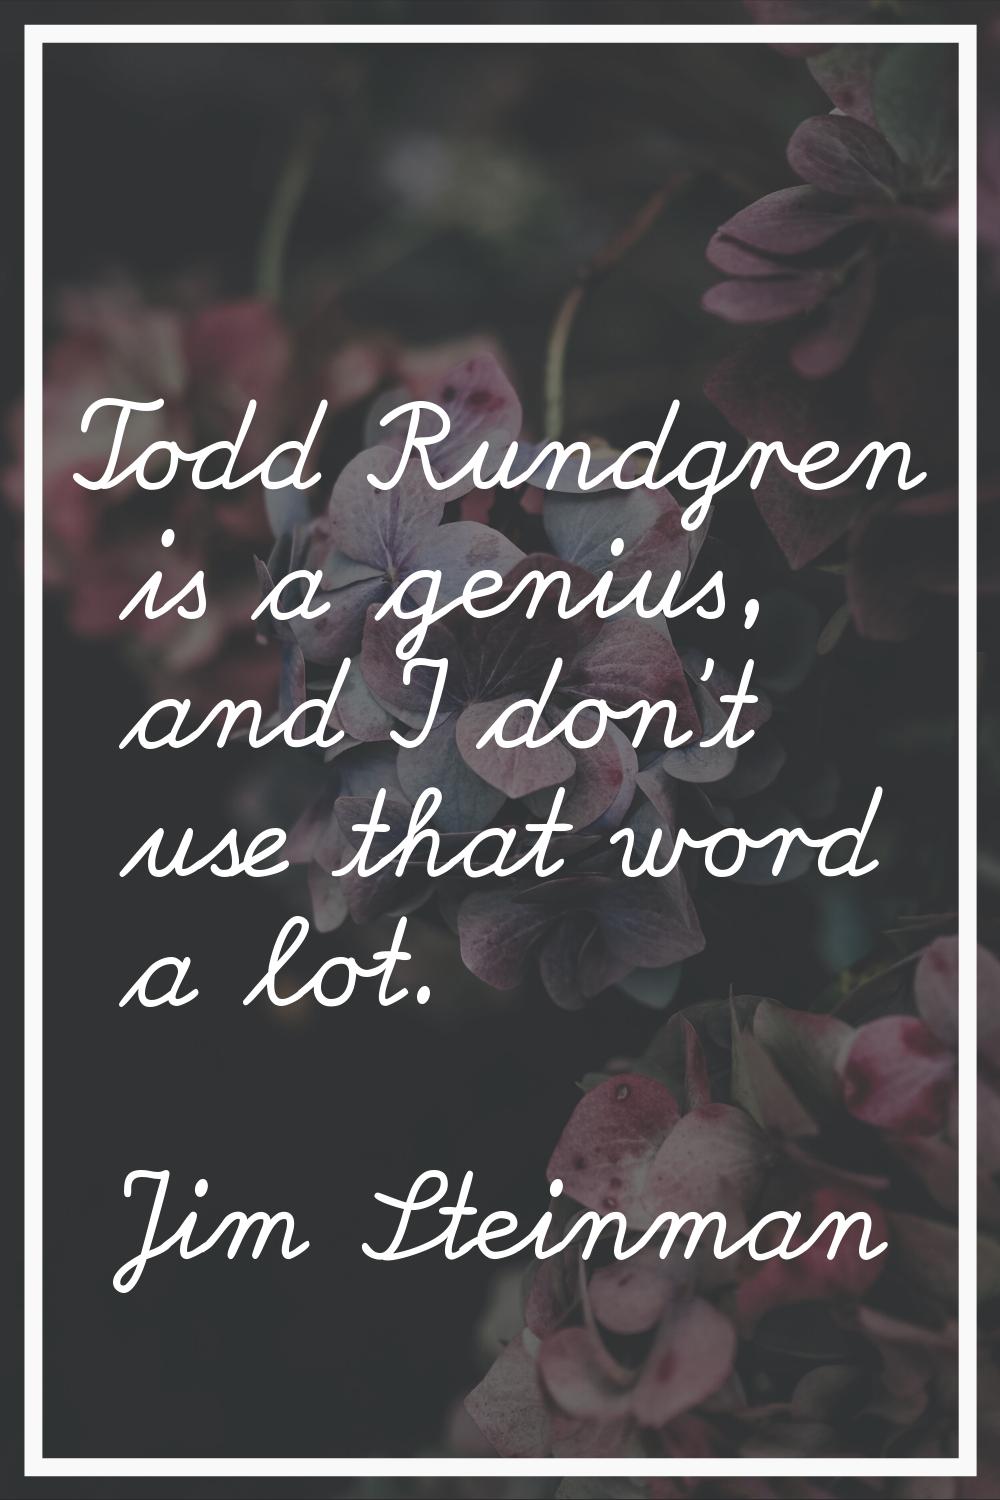 Todd Rundgren is a genius, and I don't use that word a lot.